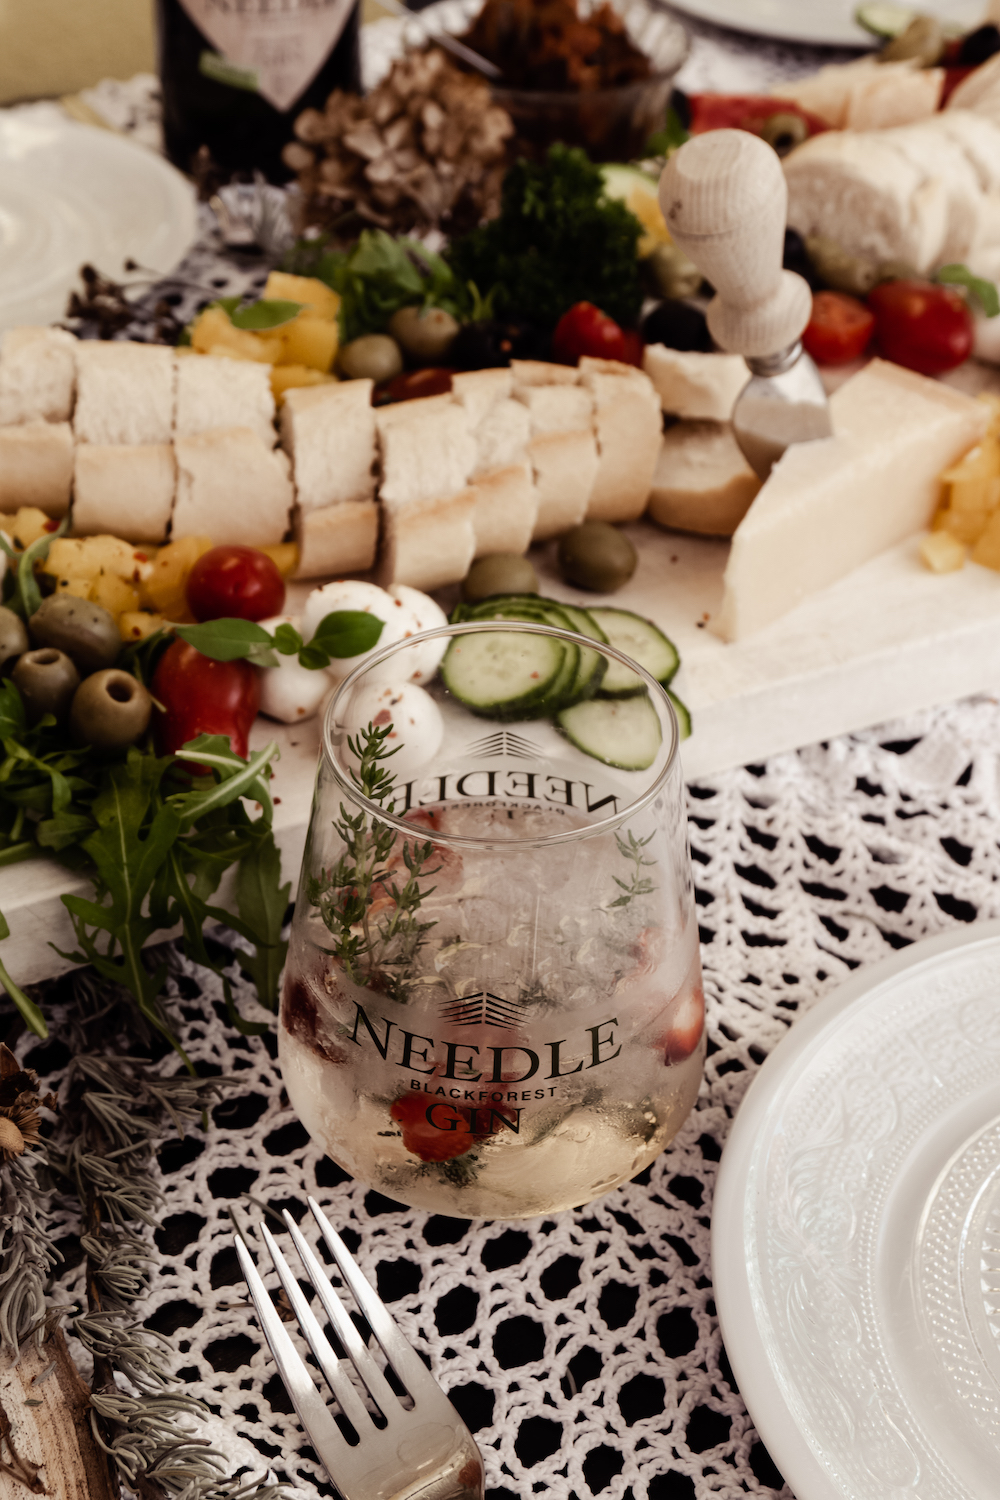 GRAZING TABLE MIT NEEDLE GIN